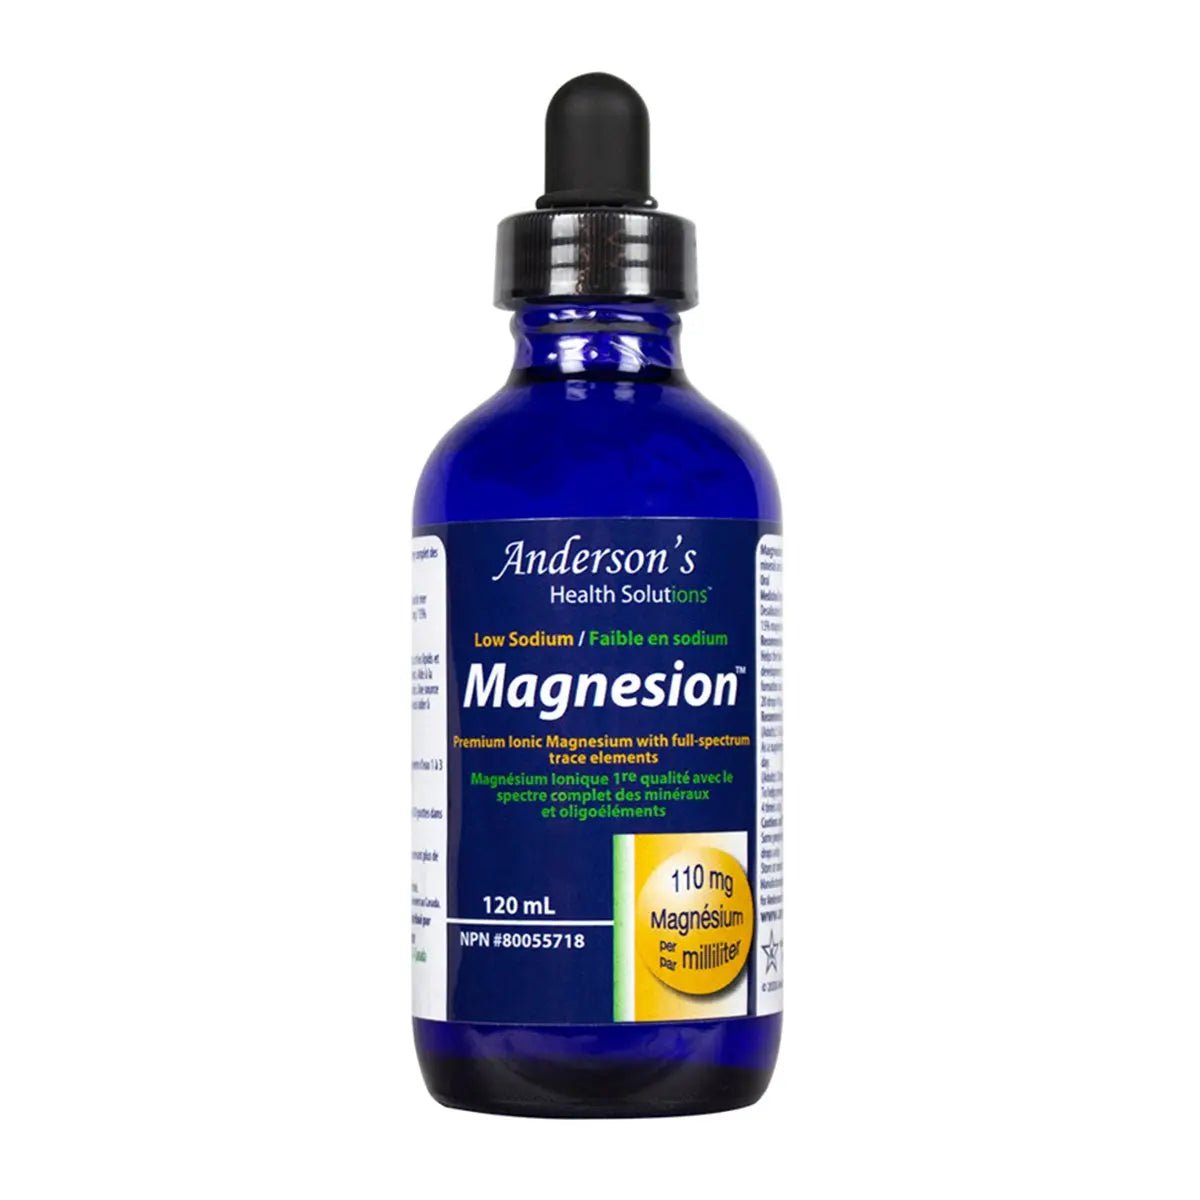 Anderson's Health Solutions Magnesion Ionic Magnesium 120mL - Nutrition Plus